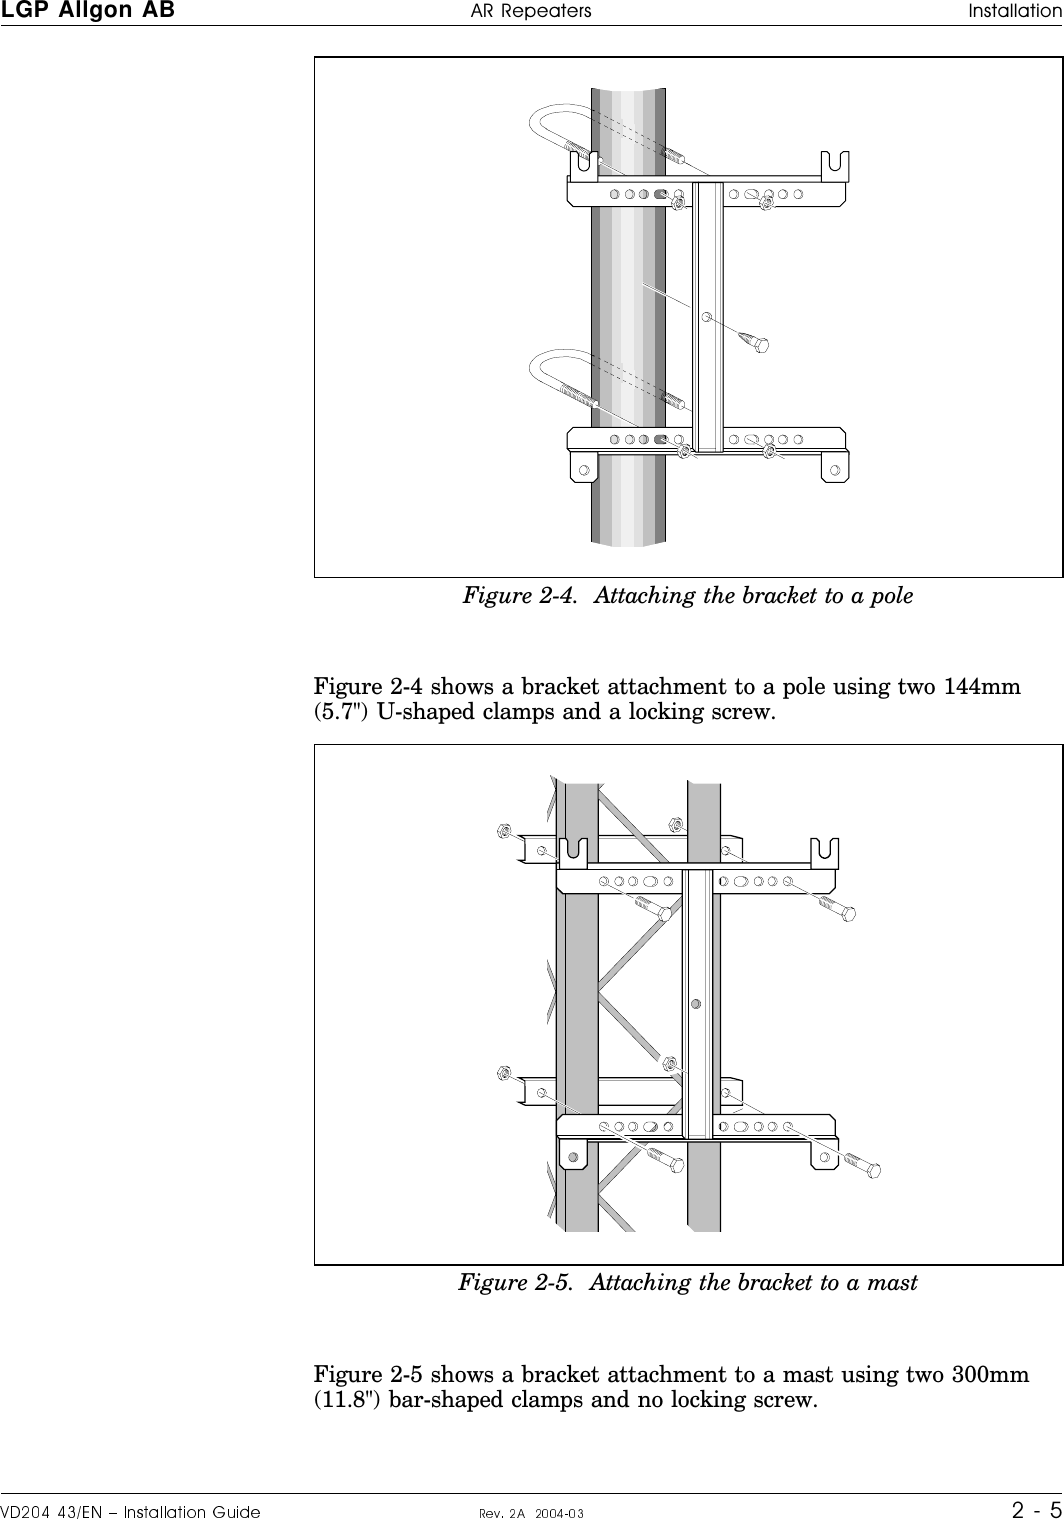  Figure 2-4 shows a bracket attachment to a pole using two 144mm(5.7&quot;) U-shaped clamps and a locking screw.Figure 2-5 shows a bracket attachment to a mast using two 300mm(11.8&quot;) bar-shaped clamps and no locking screw.Figure 2-4.  Attaching the bracket to a poleFigure 2-5.  Attaching the bracket to a mastLGP Allgon AB H|H#H o#ff#cro¤aS